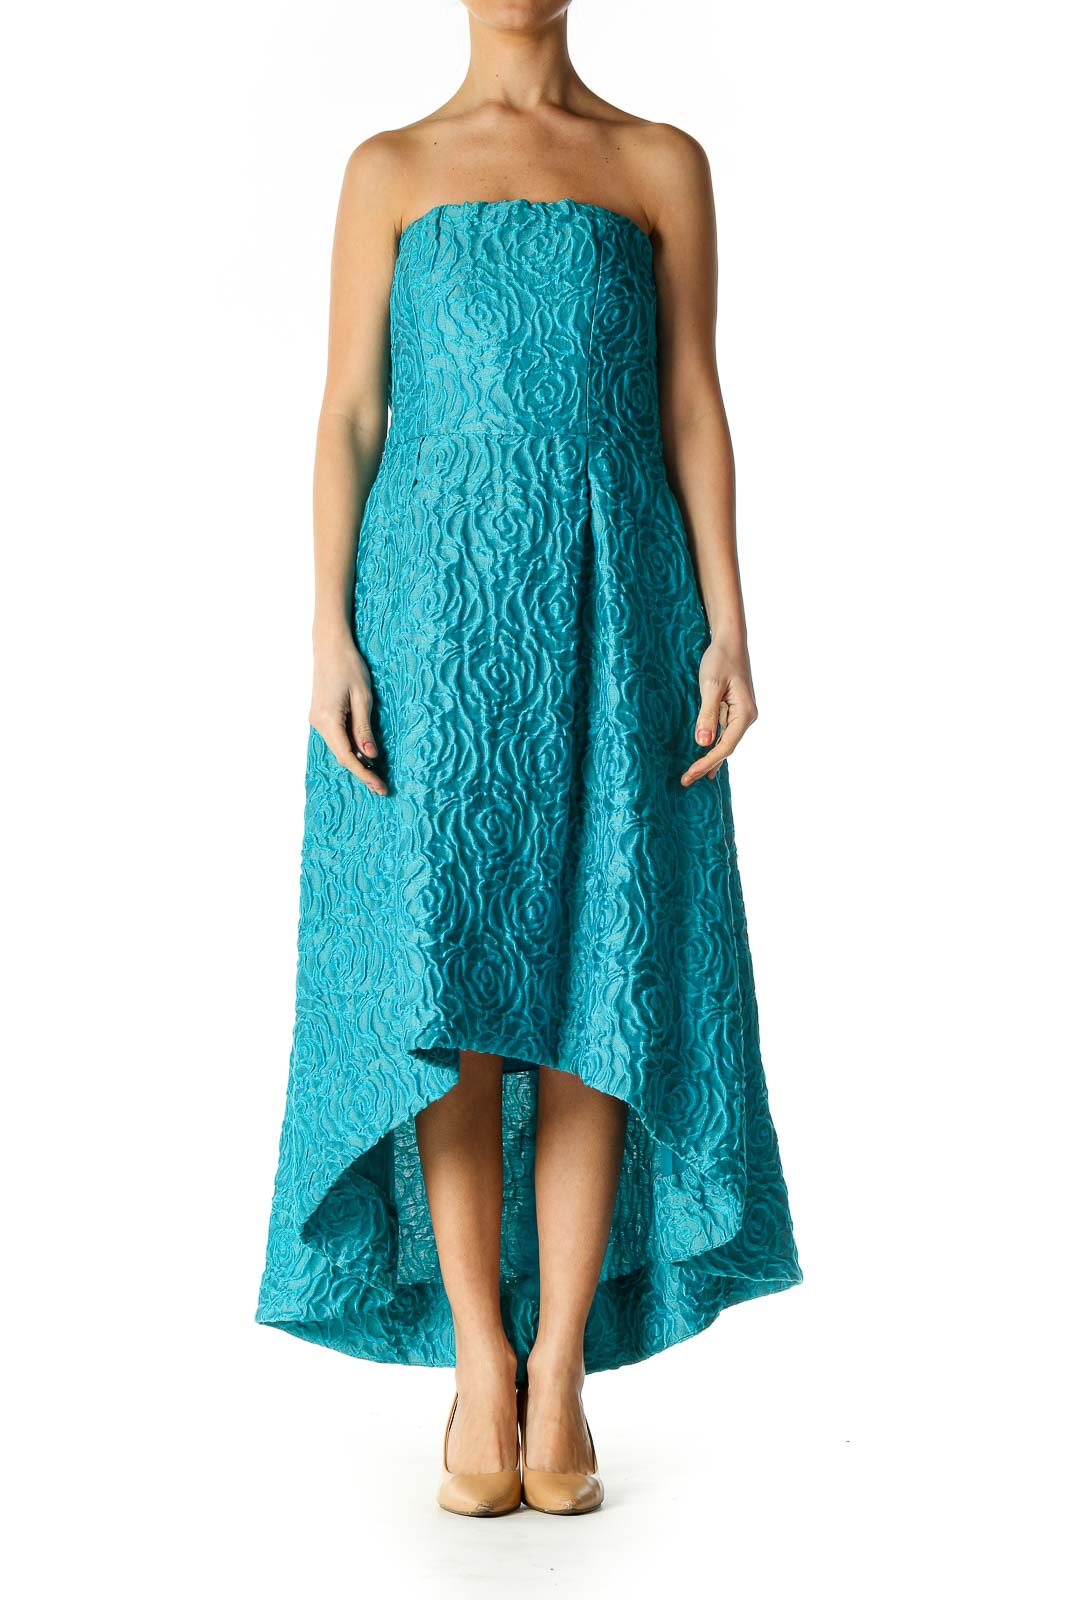 Blue Texture Formal Day Dress Front